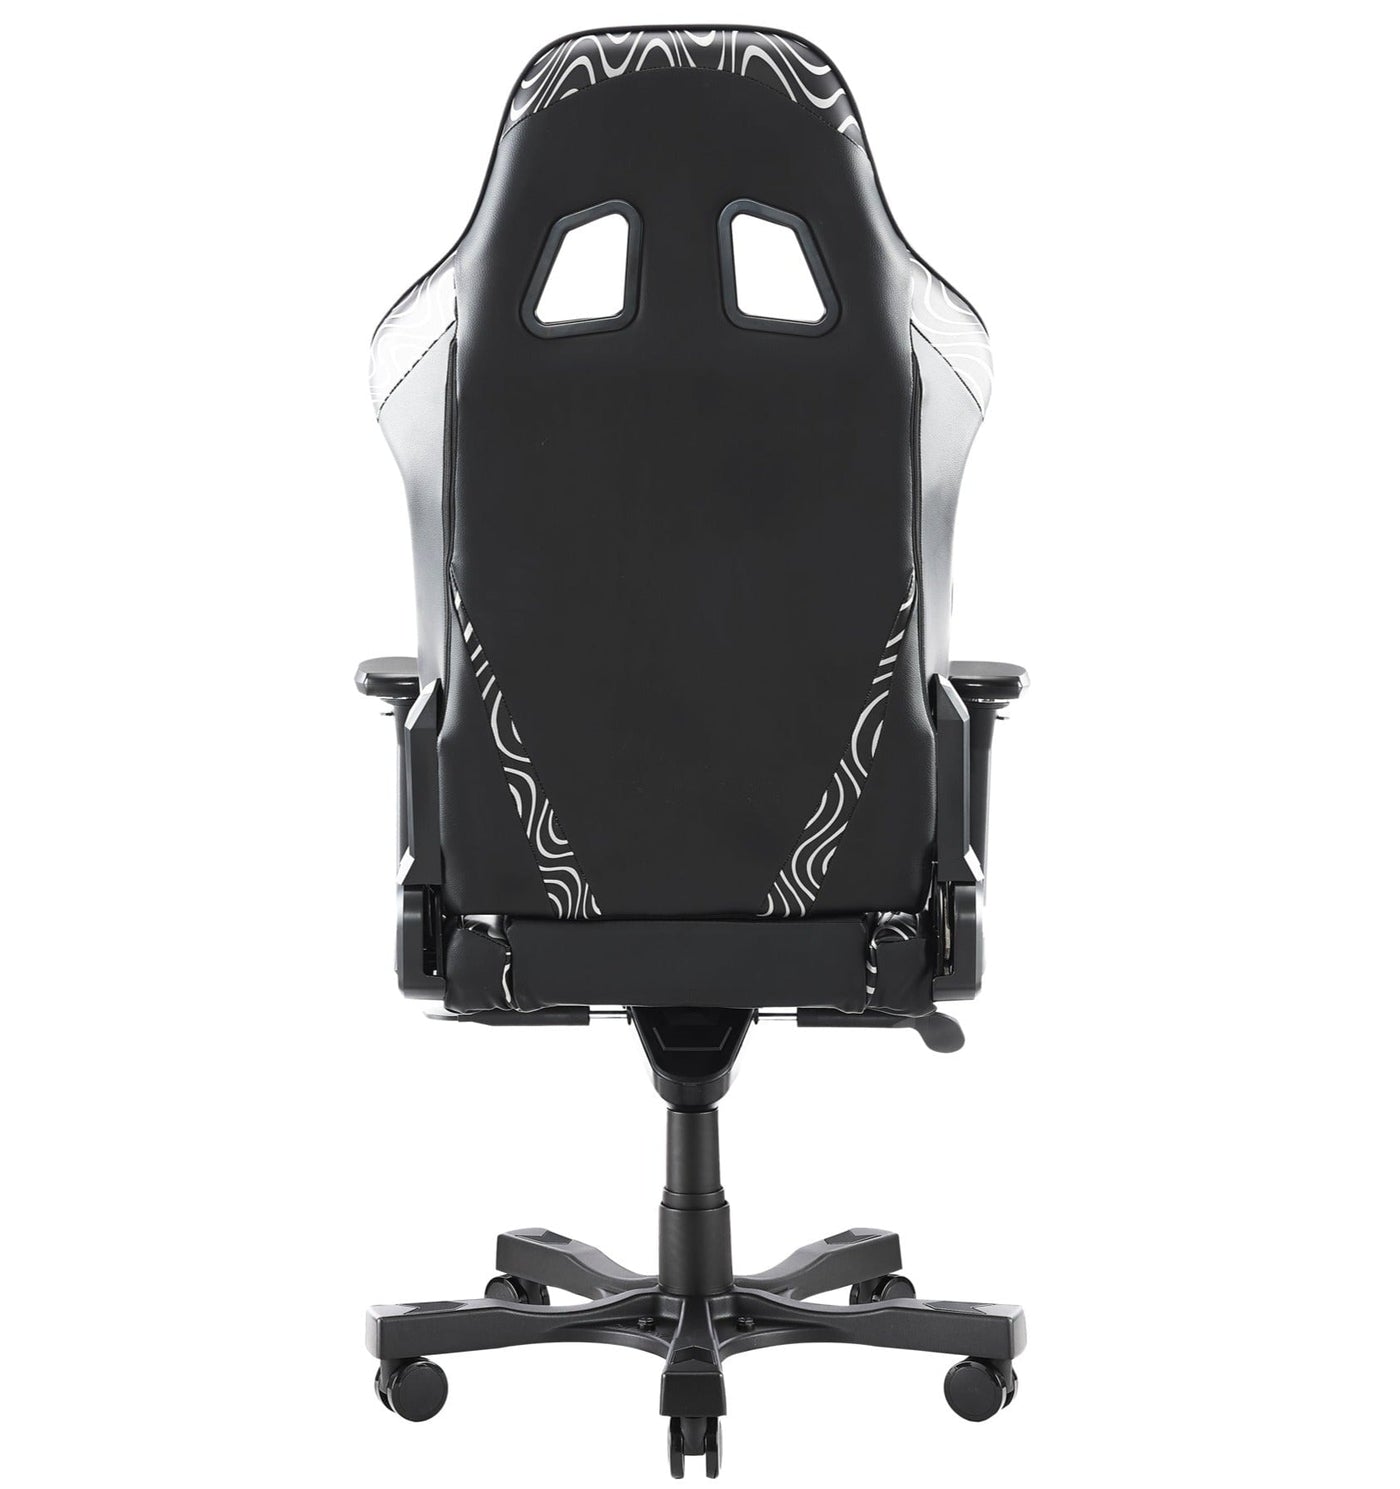 Pewdiepie LED Edition - Throttle Series Black Gaming Chair Clutch Chairz 